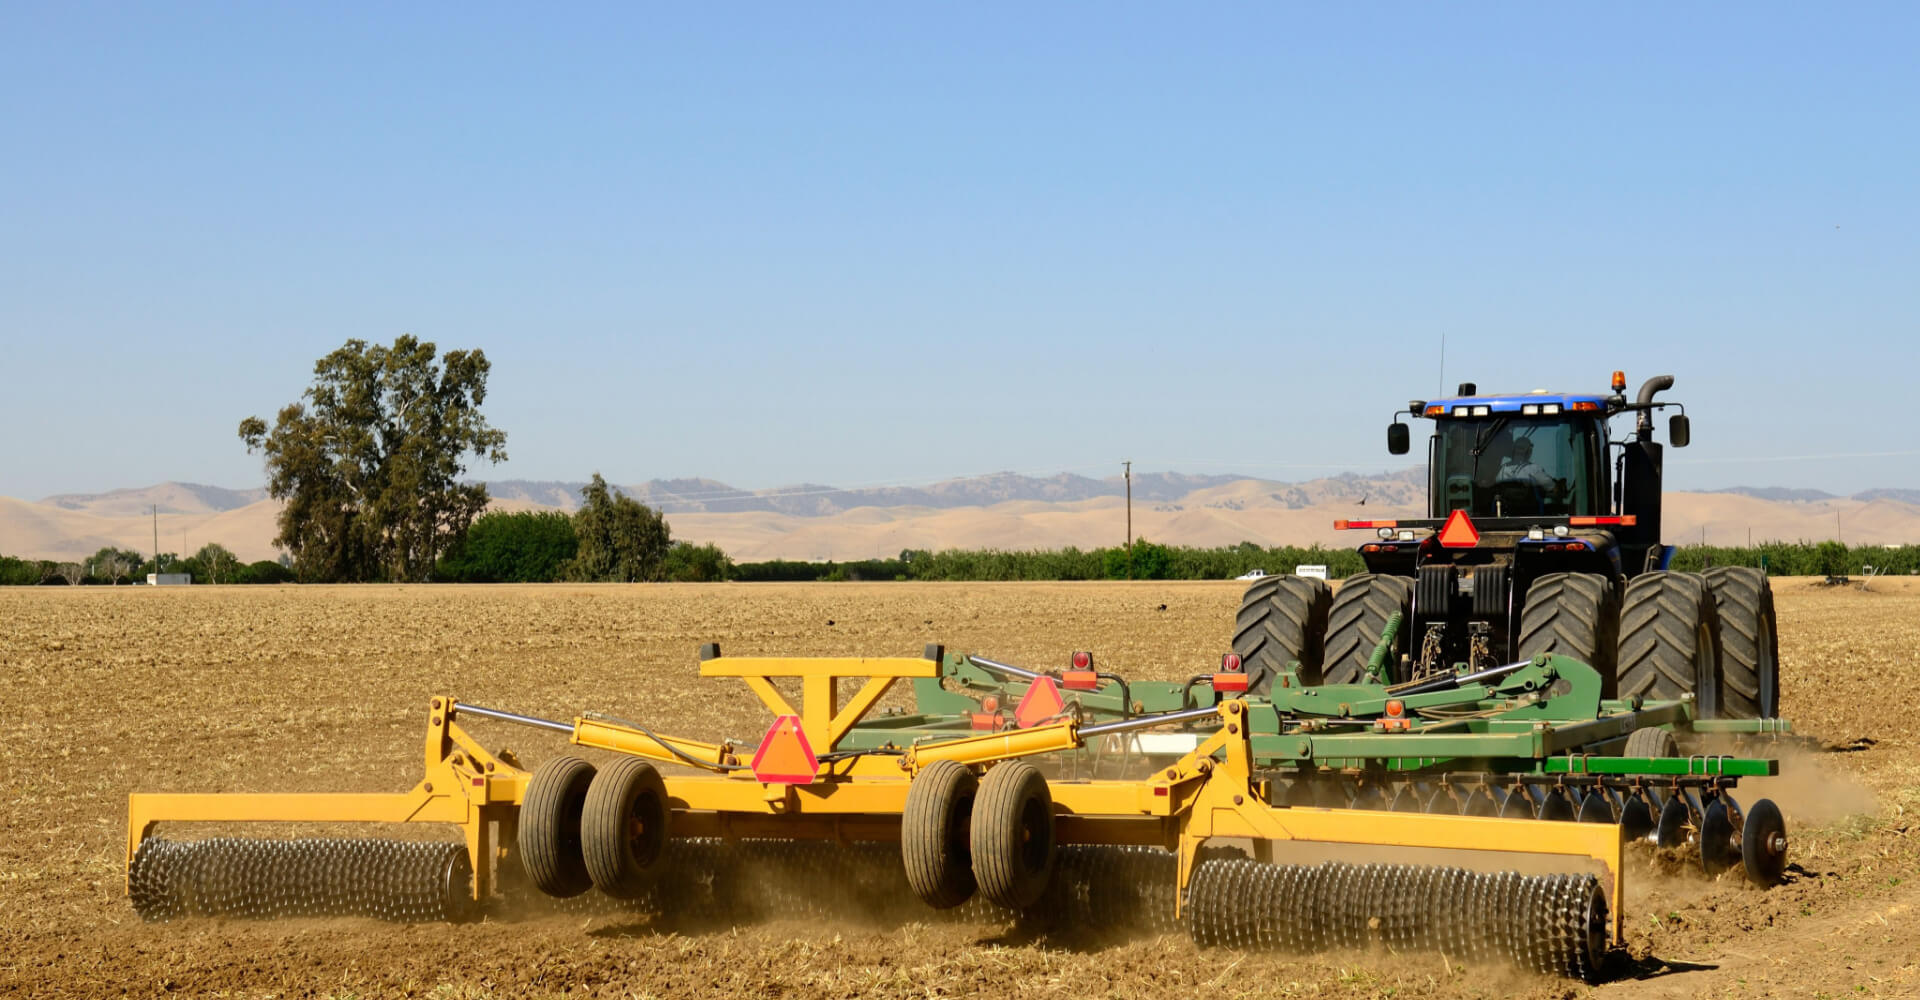 A tractor pulls a disc harrow system implement to smooth over a dirt field in preparation for planting in central California